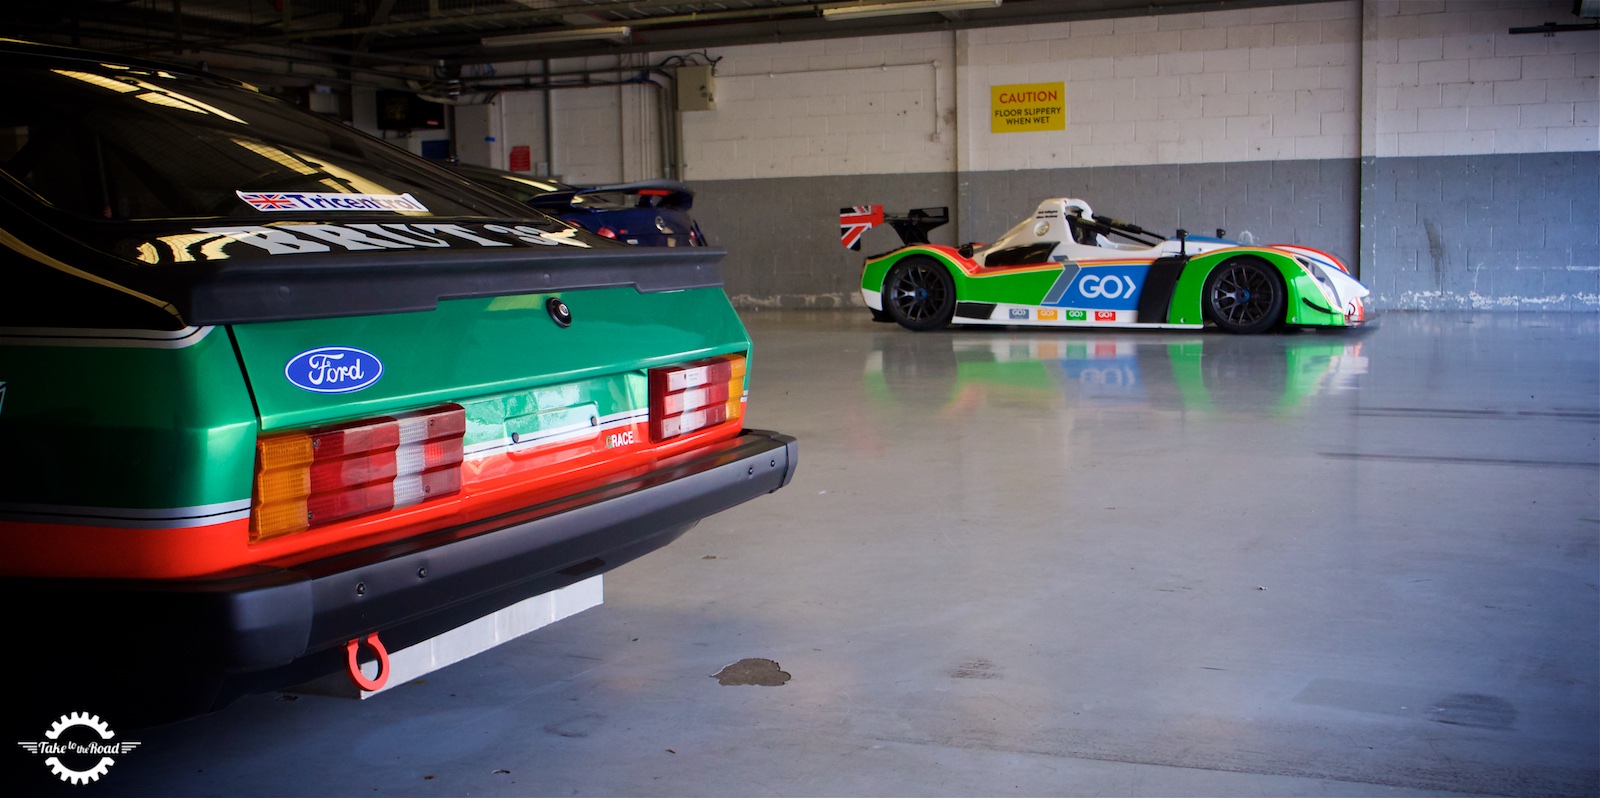 Take to the Road Feature Ford Capri Faberge Testing at Silverstone